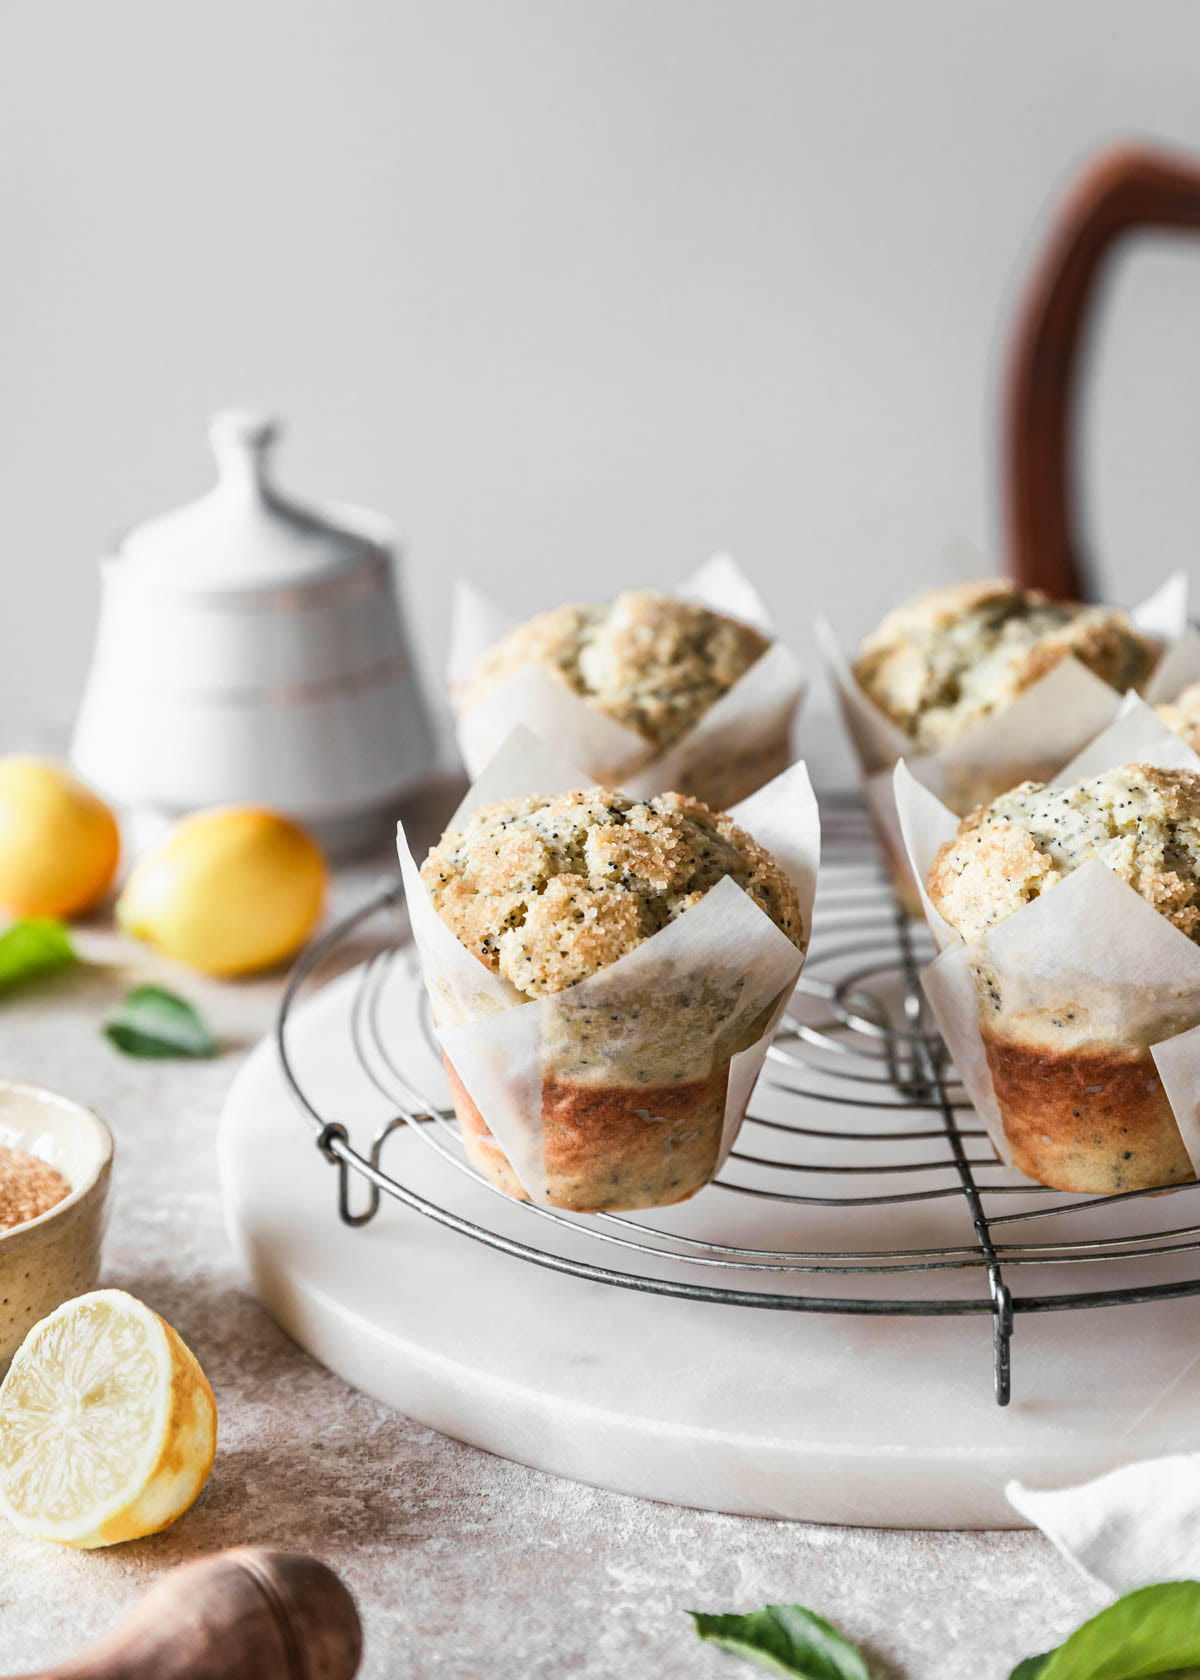 Ricotta lemon poppy seed muffins on a circular cooling rack next to lemons and a white sugar bowl on a beige speckled counter.